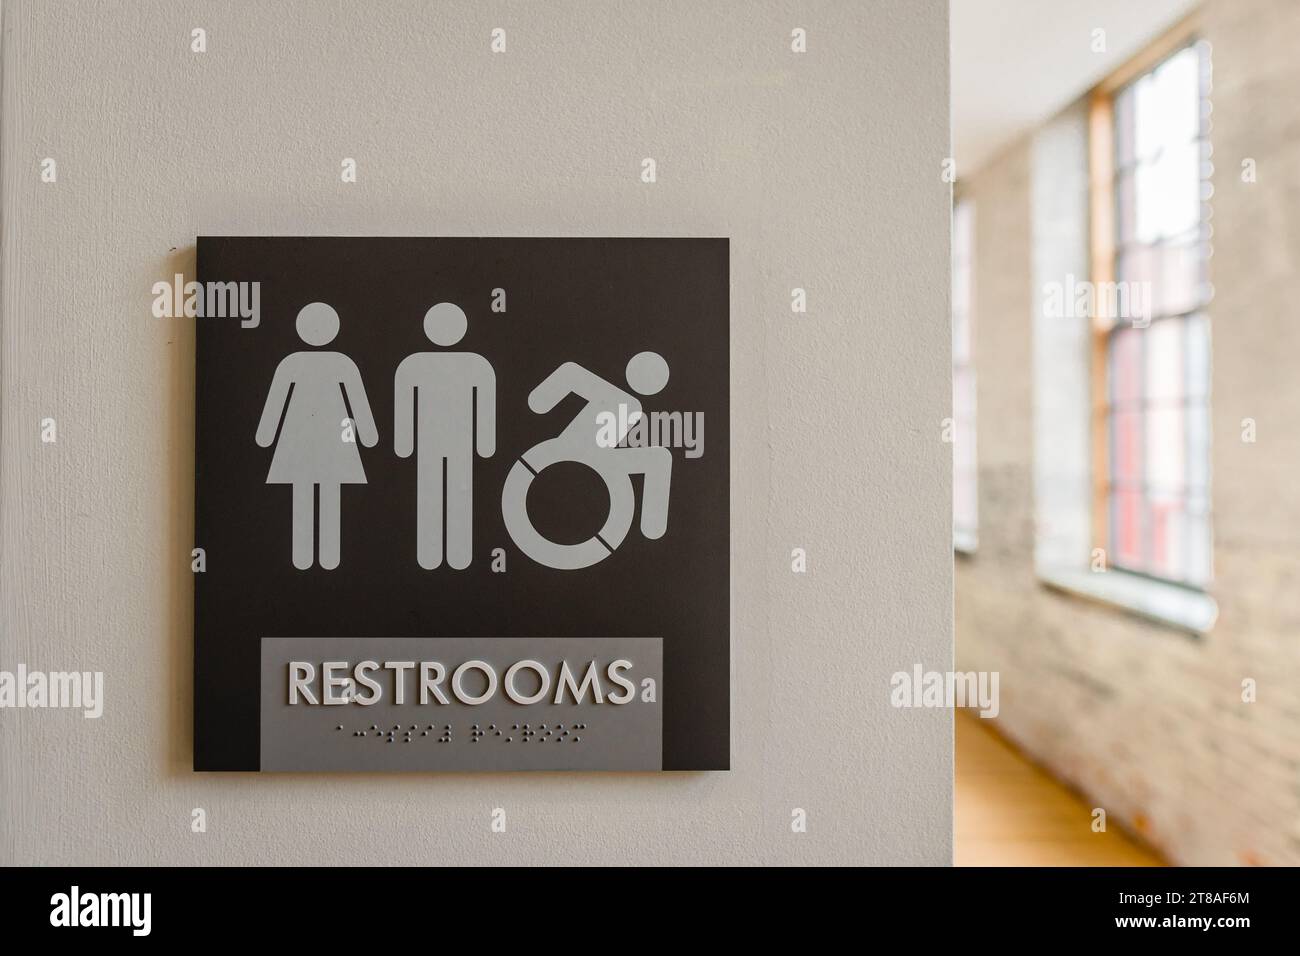 Close-up of unisex bathroom sign against neutral colored wall with symbols for male, female, and wheelchair. Copy space. Stock Photo